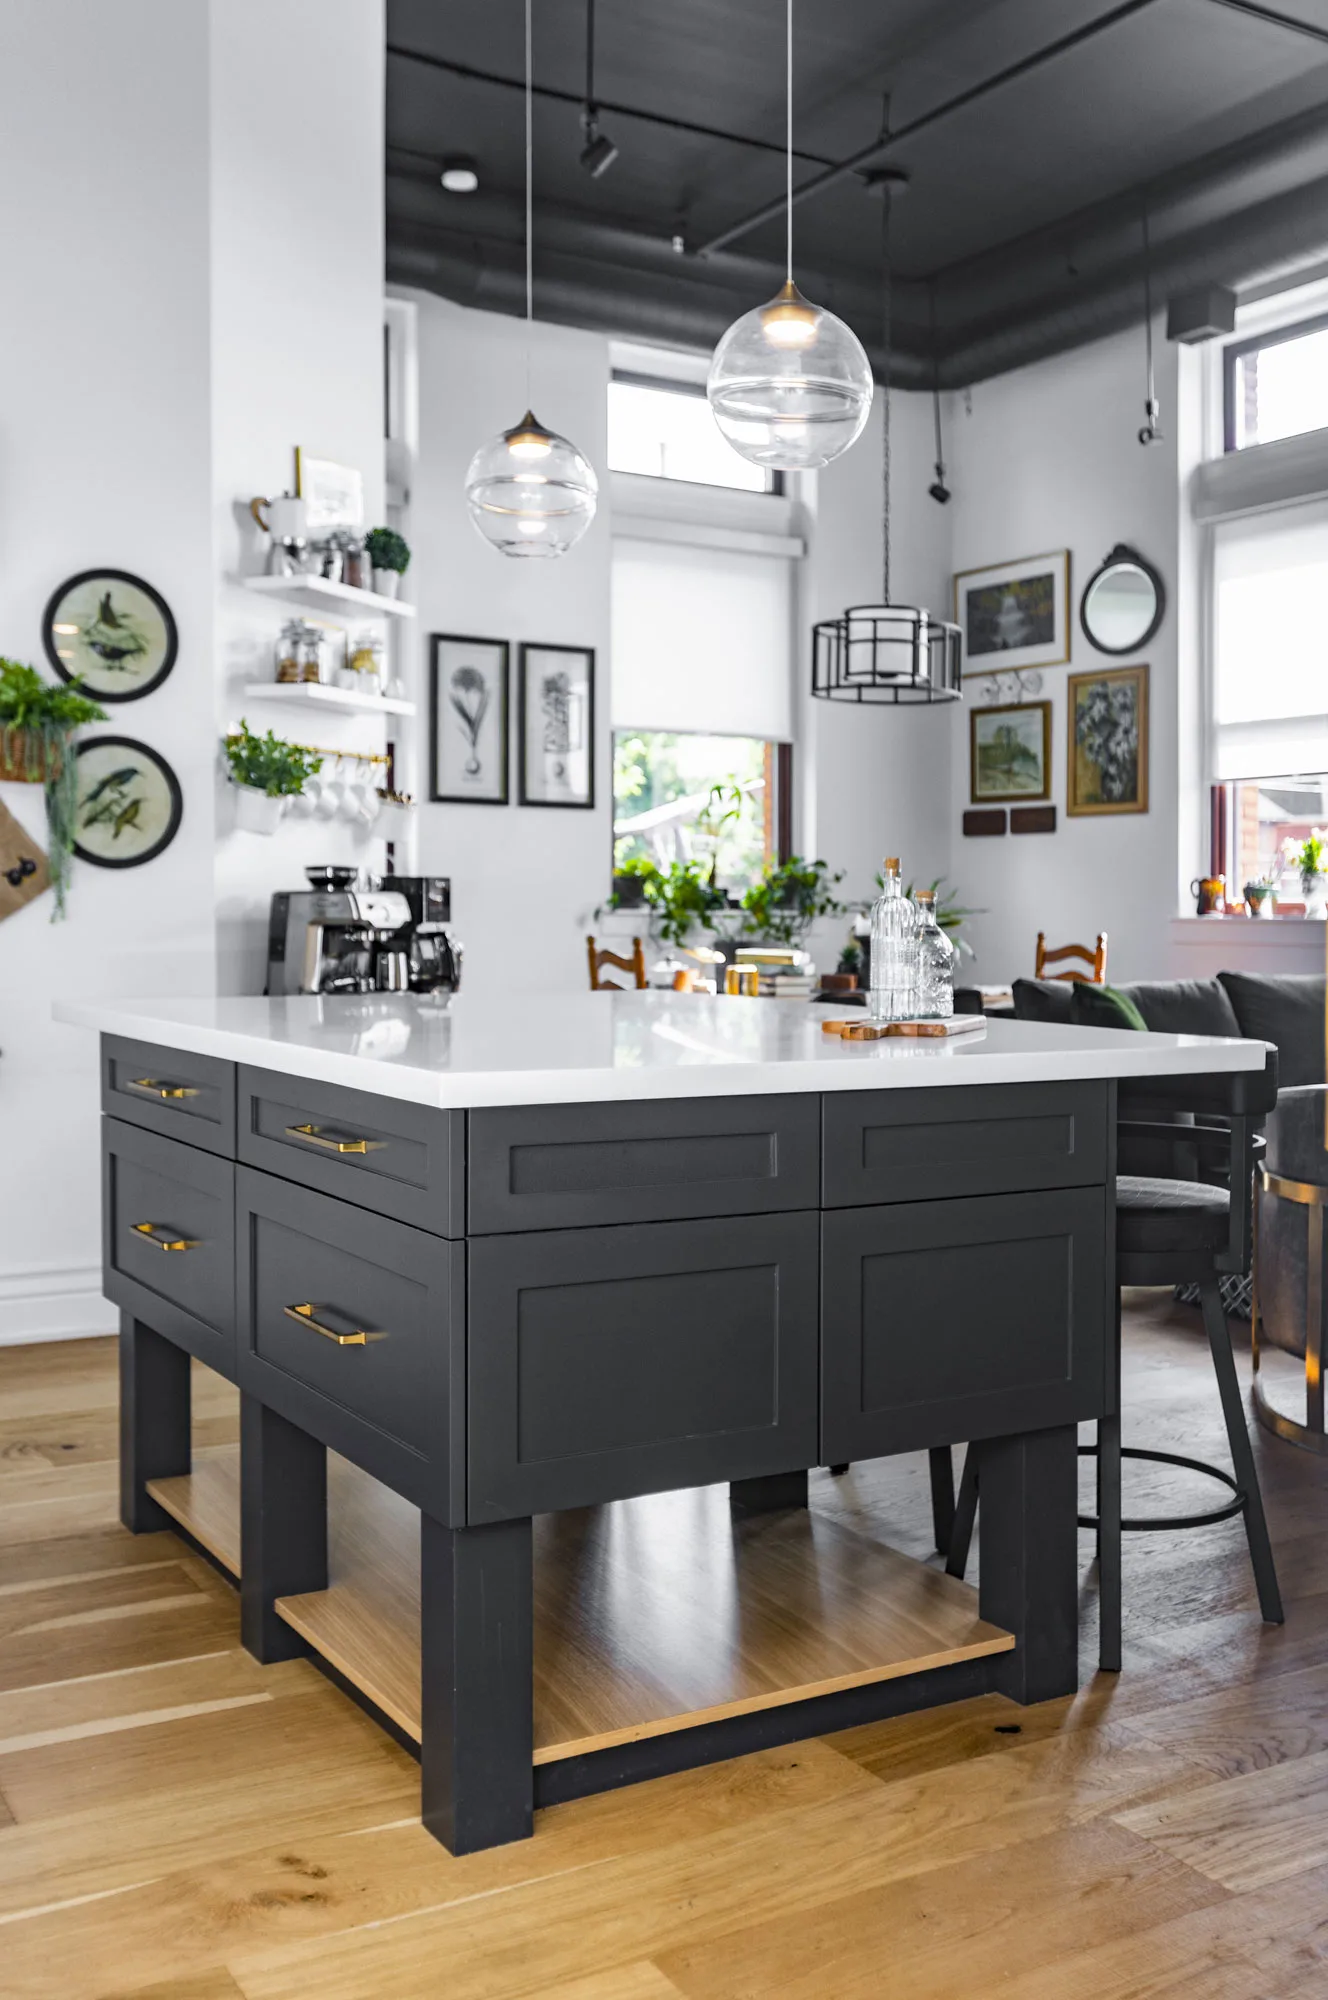 A dark grey kitchen island with a white top and gold handles